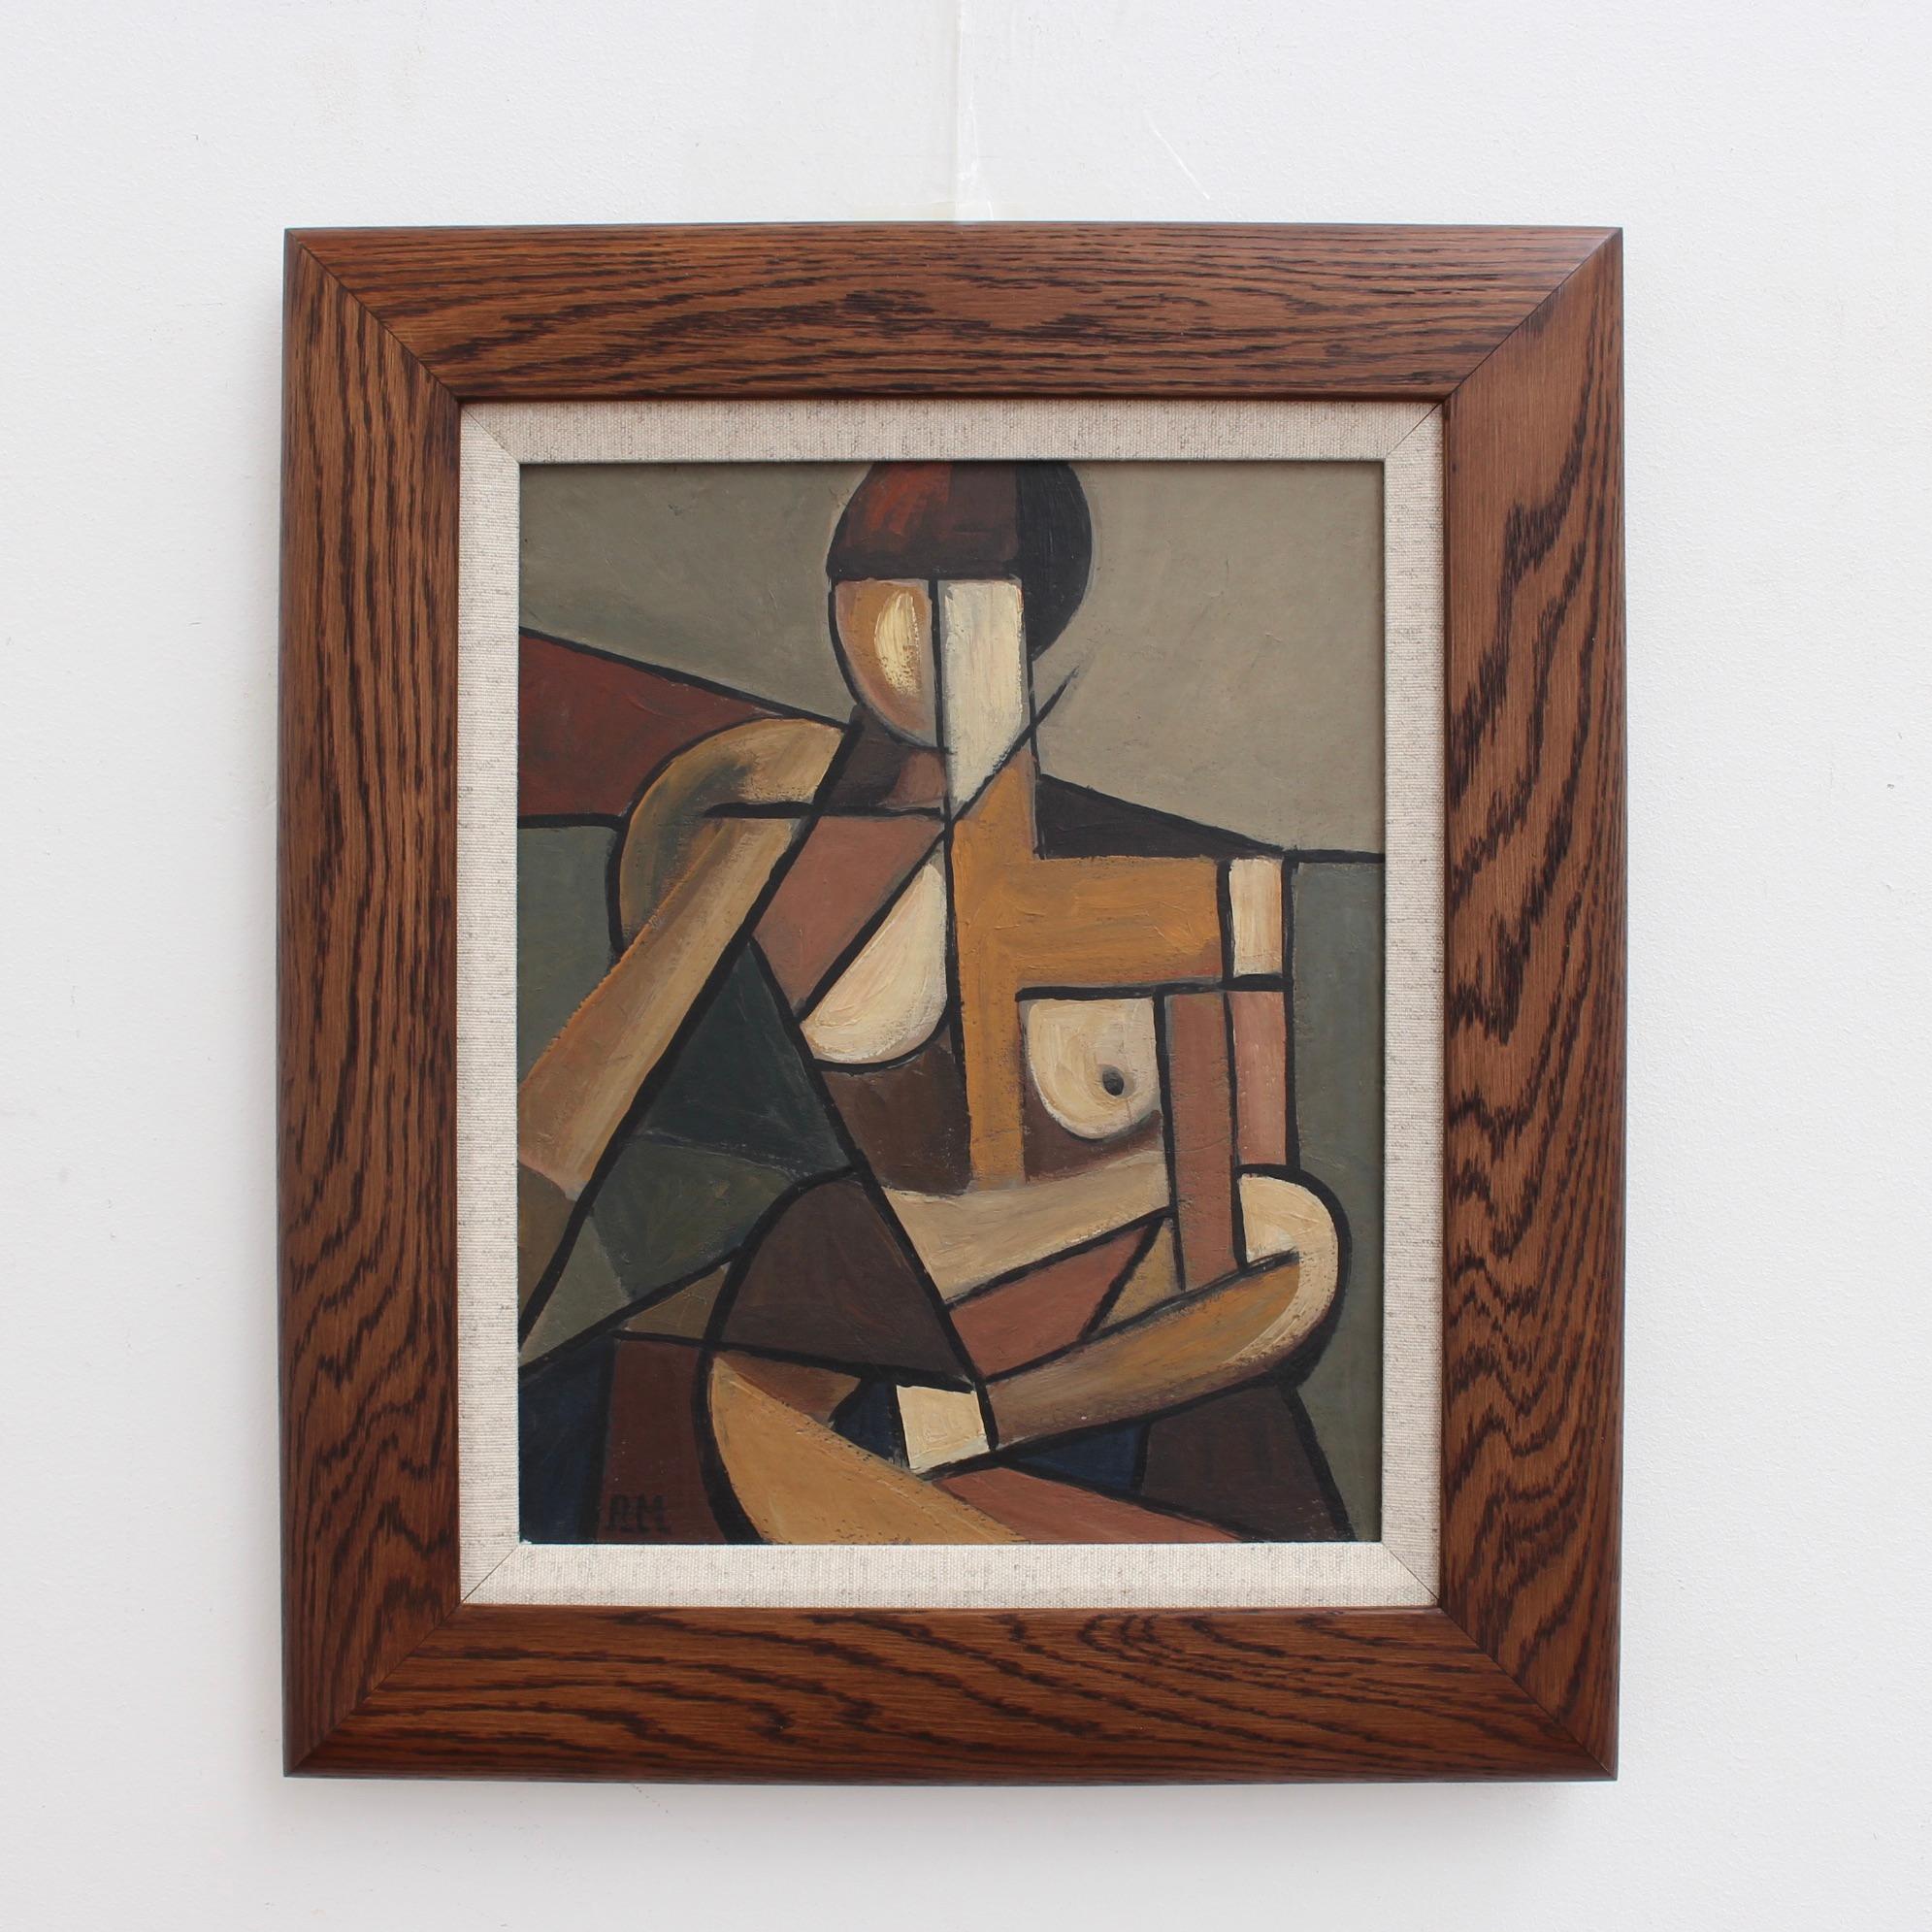 'Portrait of Seated Nude', Berlin School  - Cubist Painting by Unknown